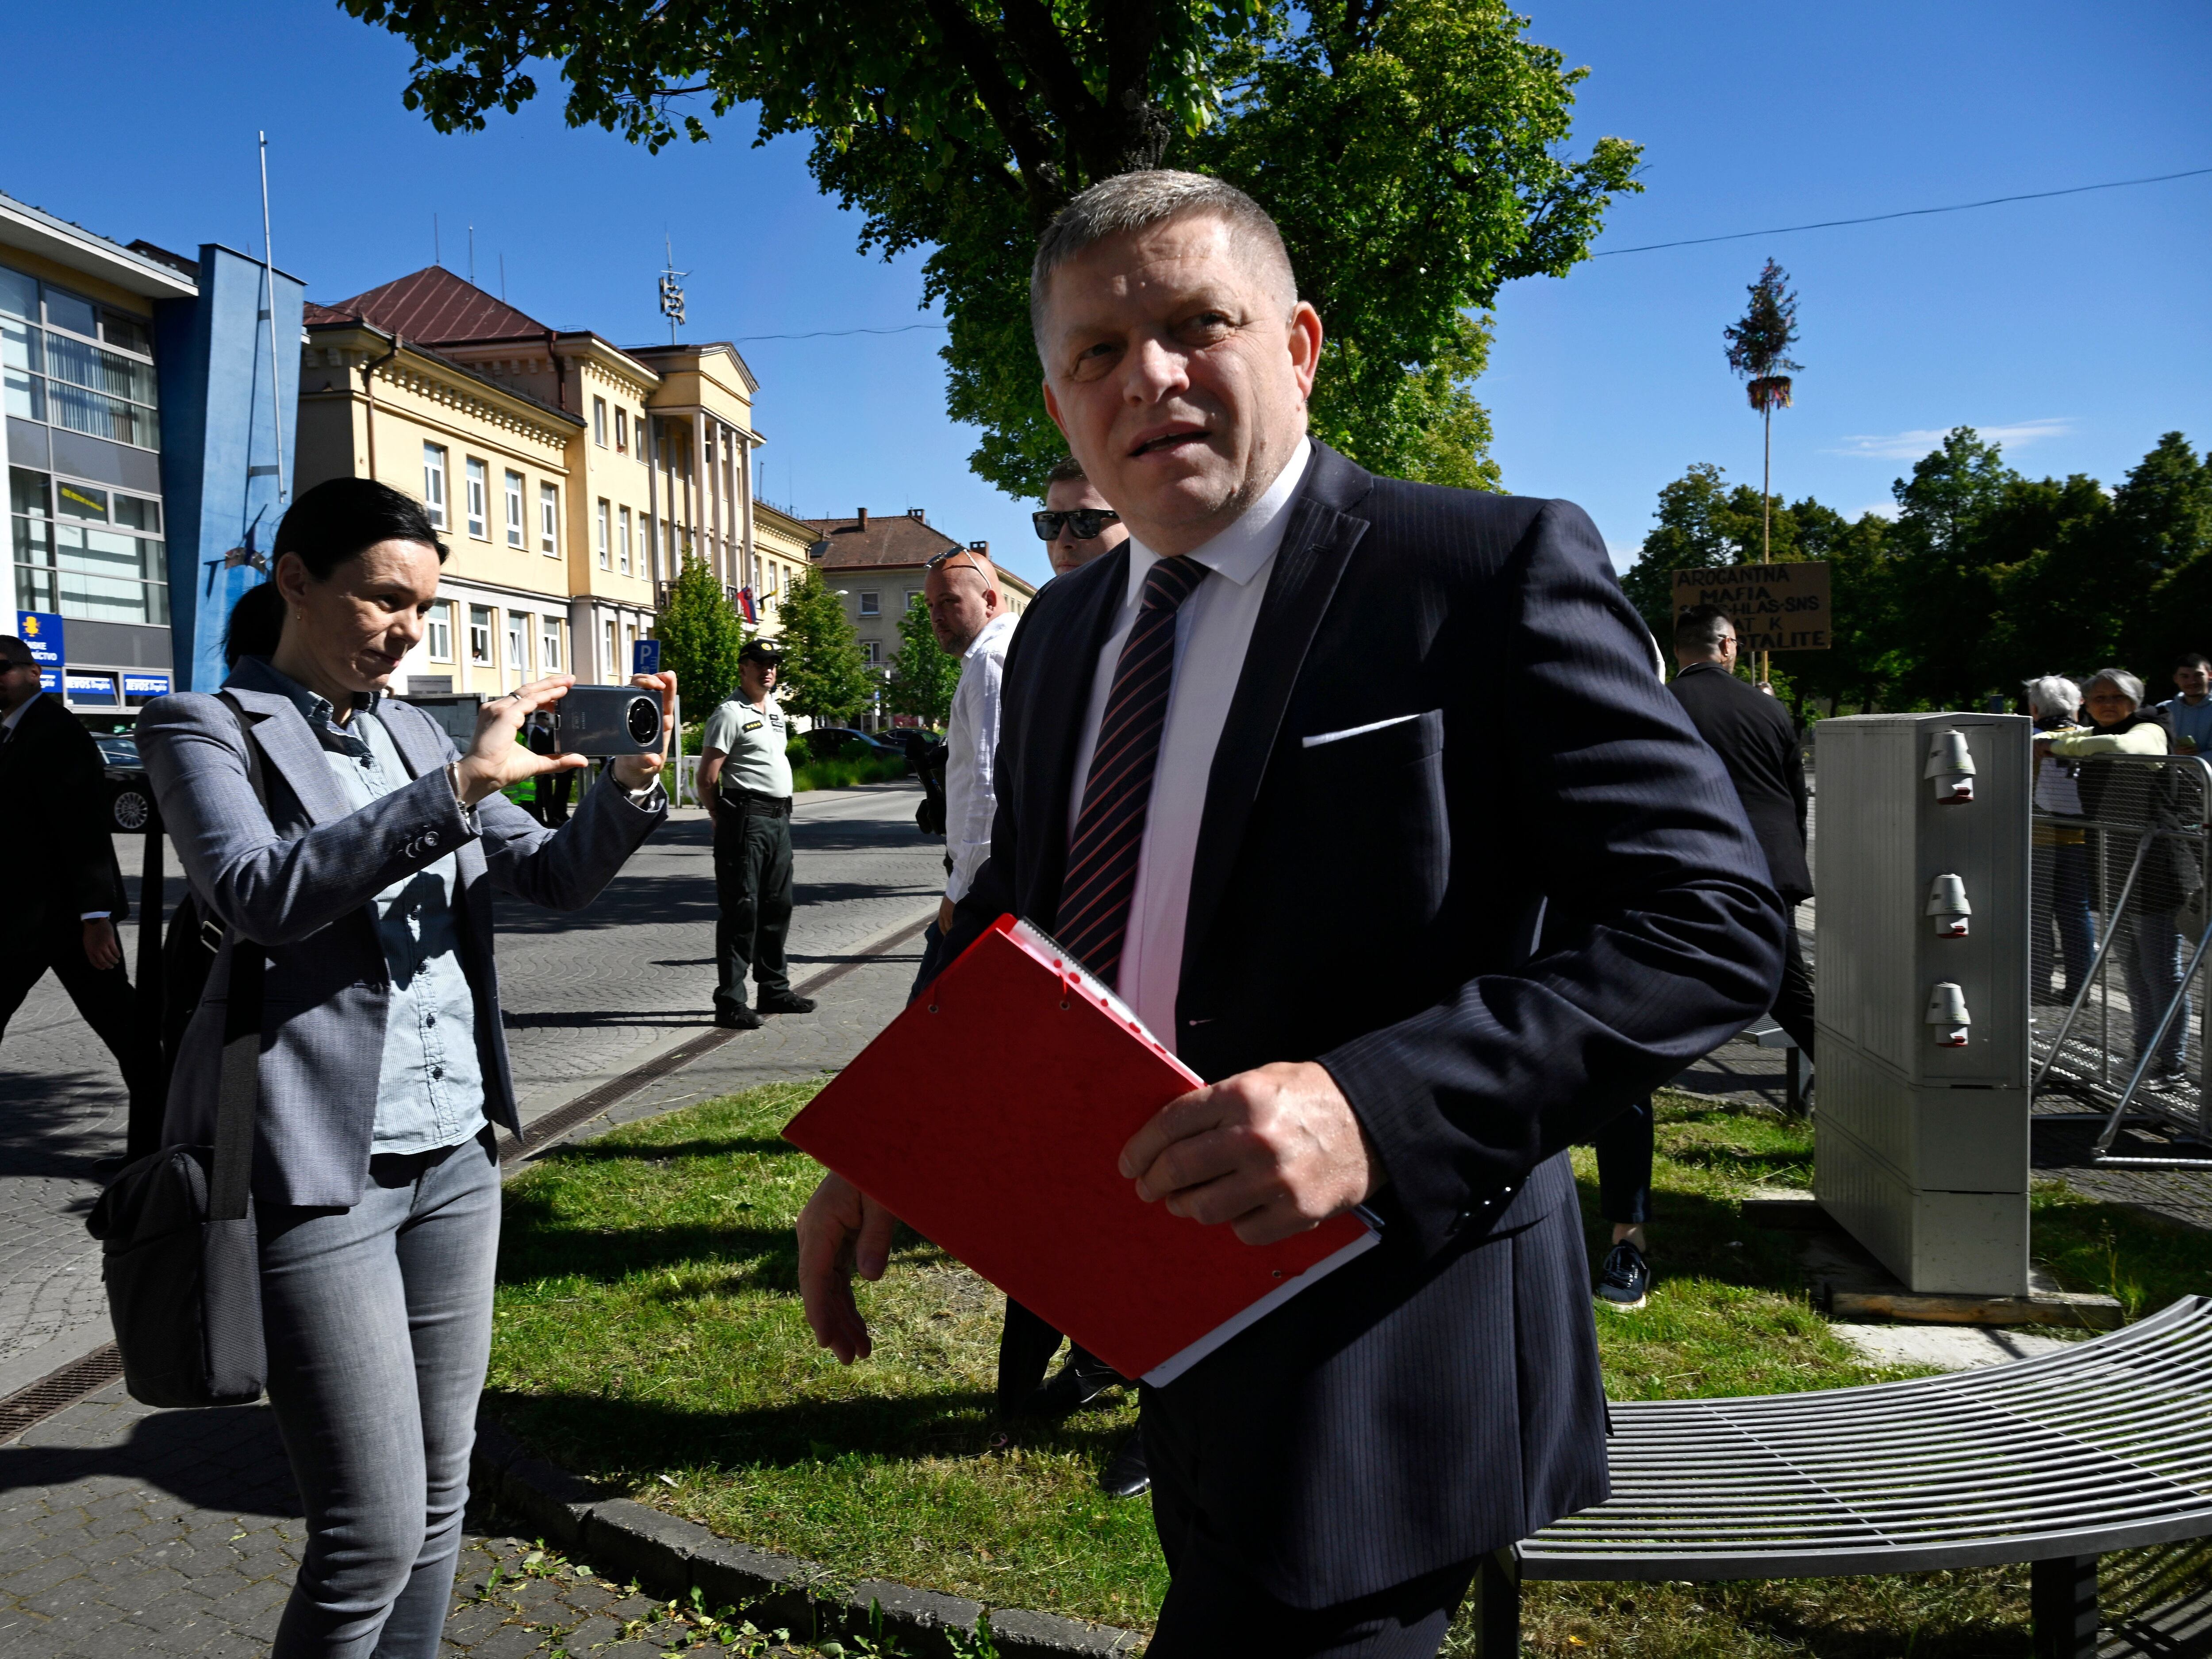 Slovakia’s PM makes first public appearance since assassination attempt